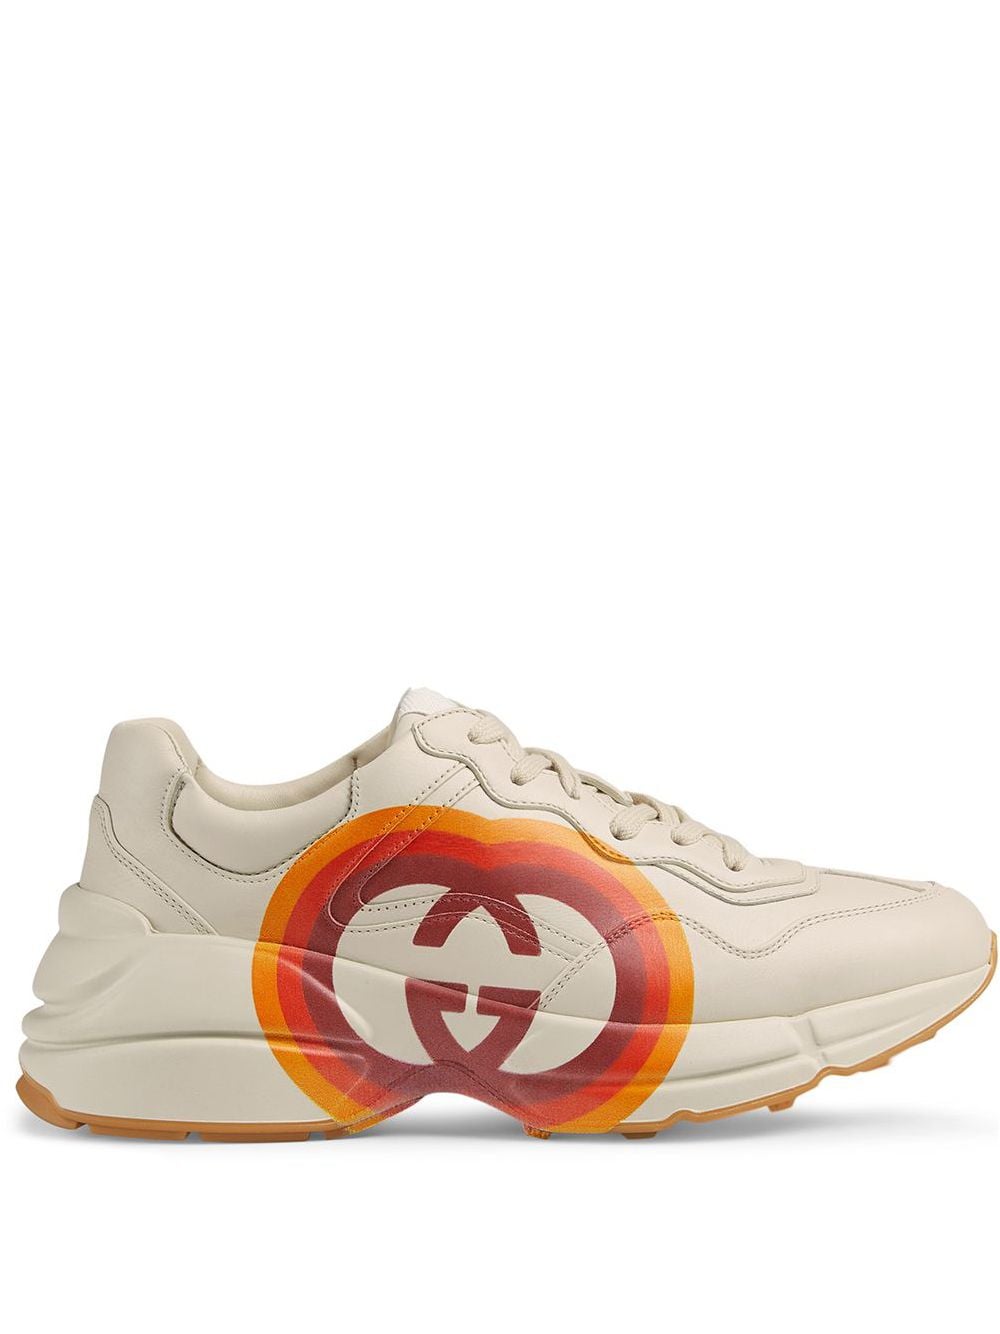 Gucci Rhyton Sneakers With Interlocking G And Heart - Farfetch